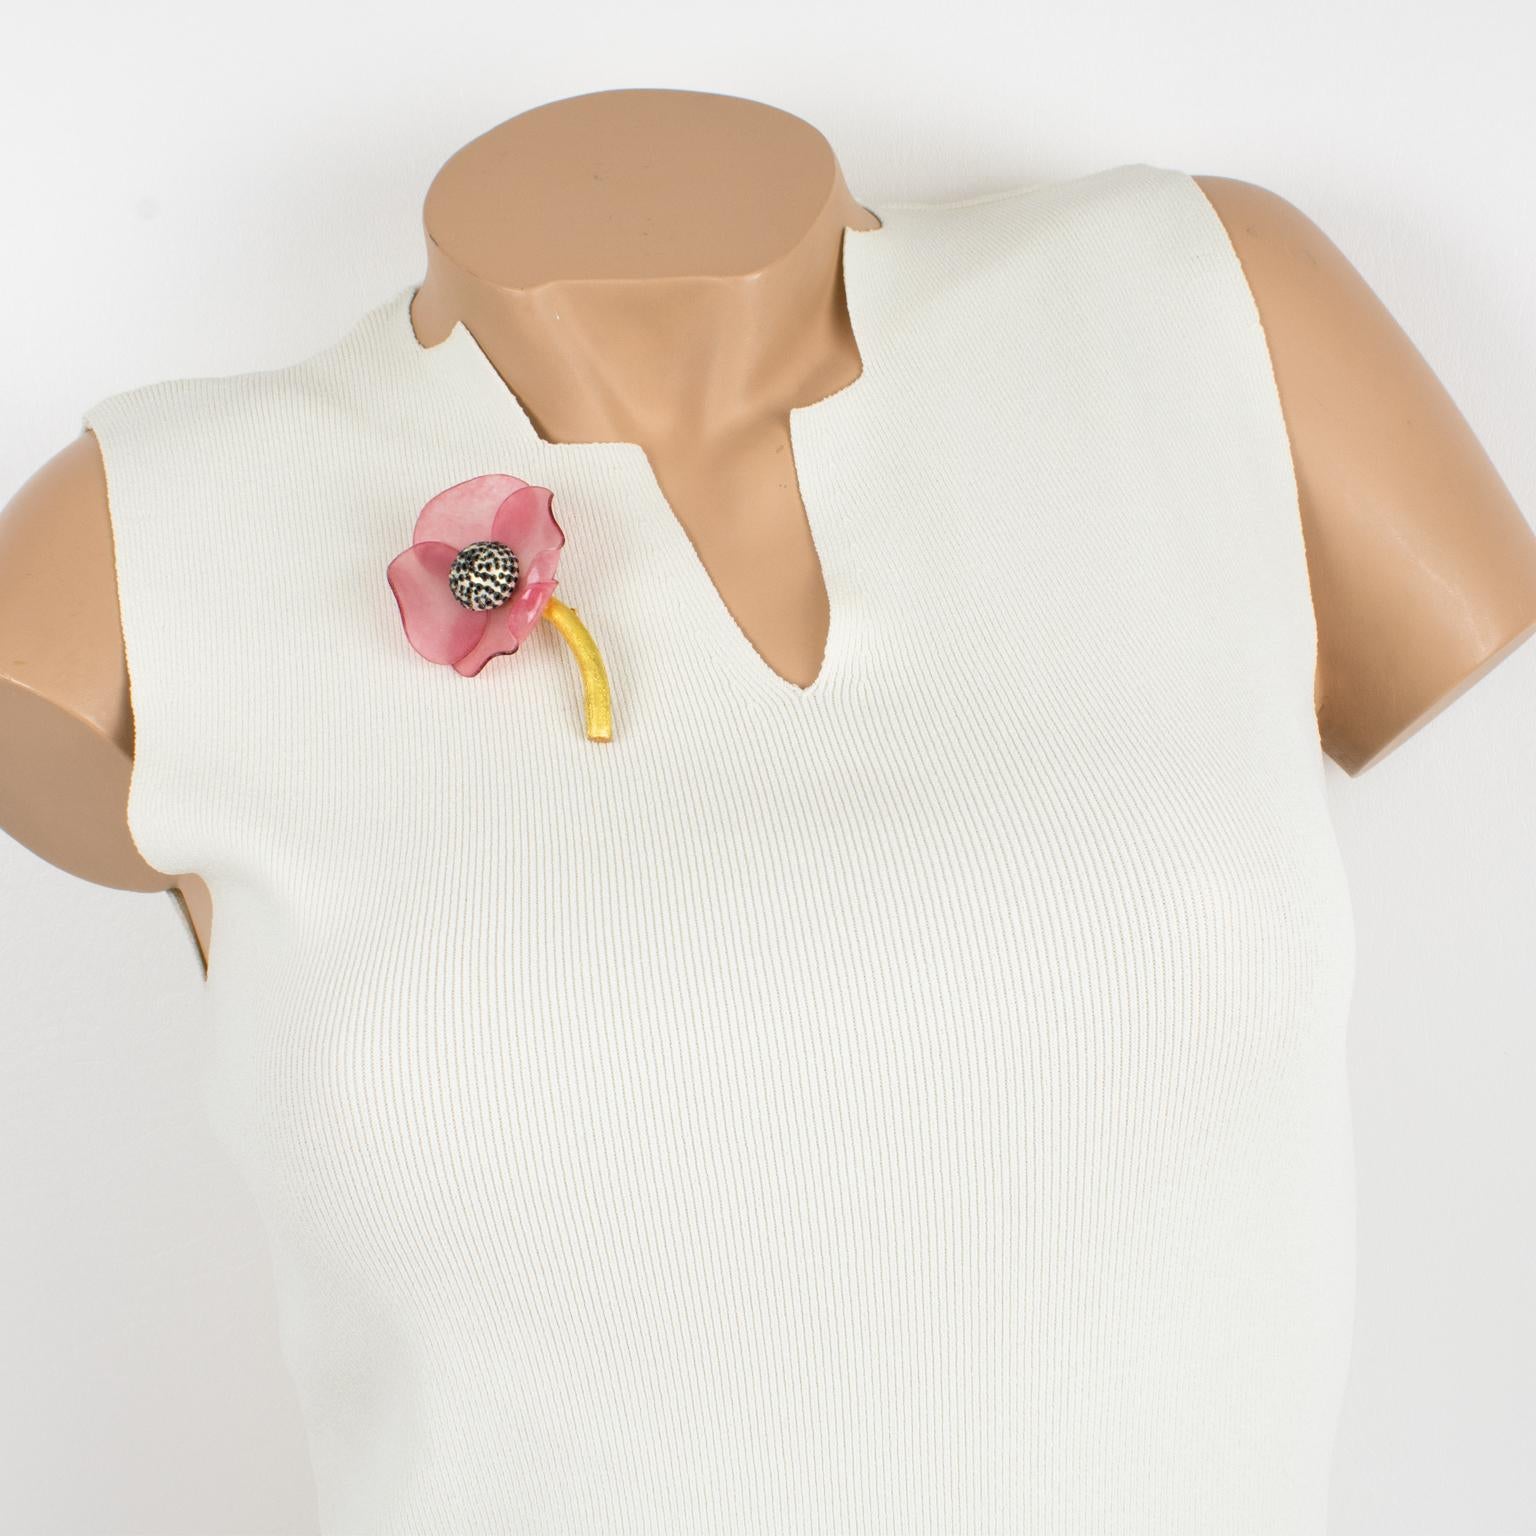 Charming dimensional pin brooch designed by Cilea Paris for French jewelry store Fabrice. Floral-inspired hand-made artisanal resin brooch featuring poppy flowers with textured patterns built together to form a powerful statement piece. Very nice